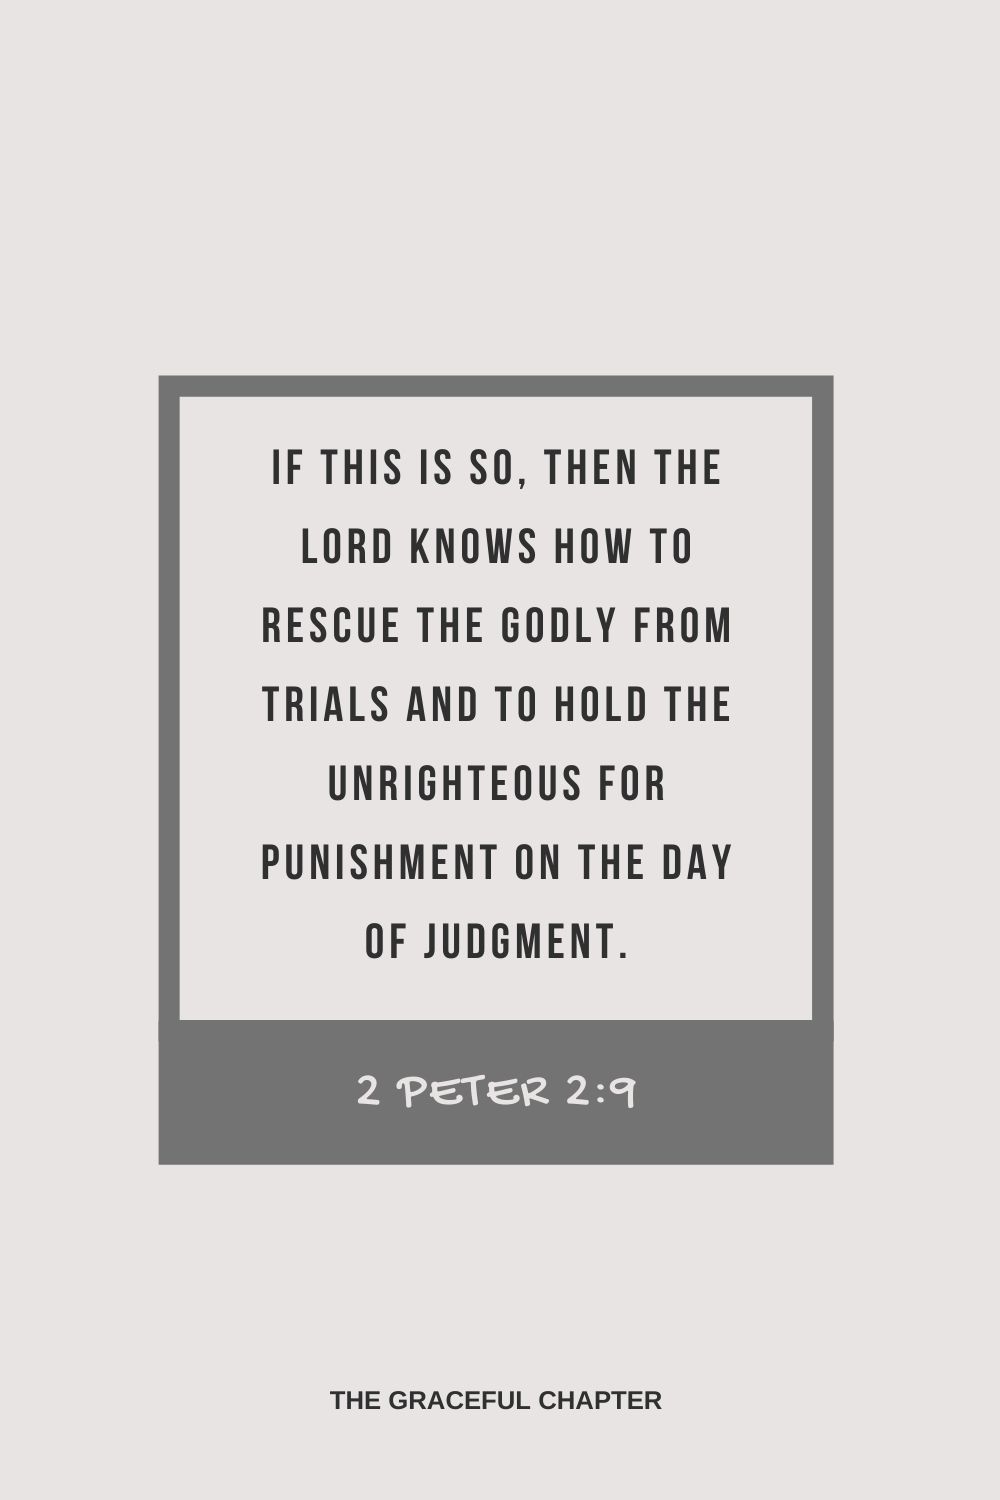 If this is so, then the Lord knows how to rescue the godly from trials and to hold the unrighteous for punishment on the day of judgment. 2 Peter 2:9